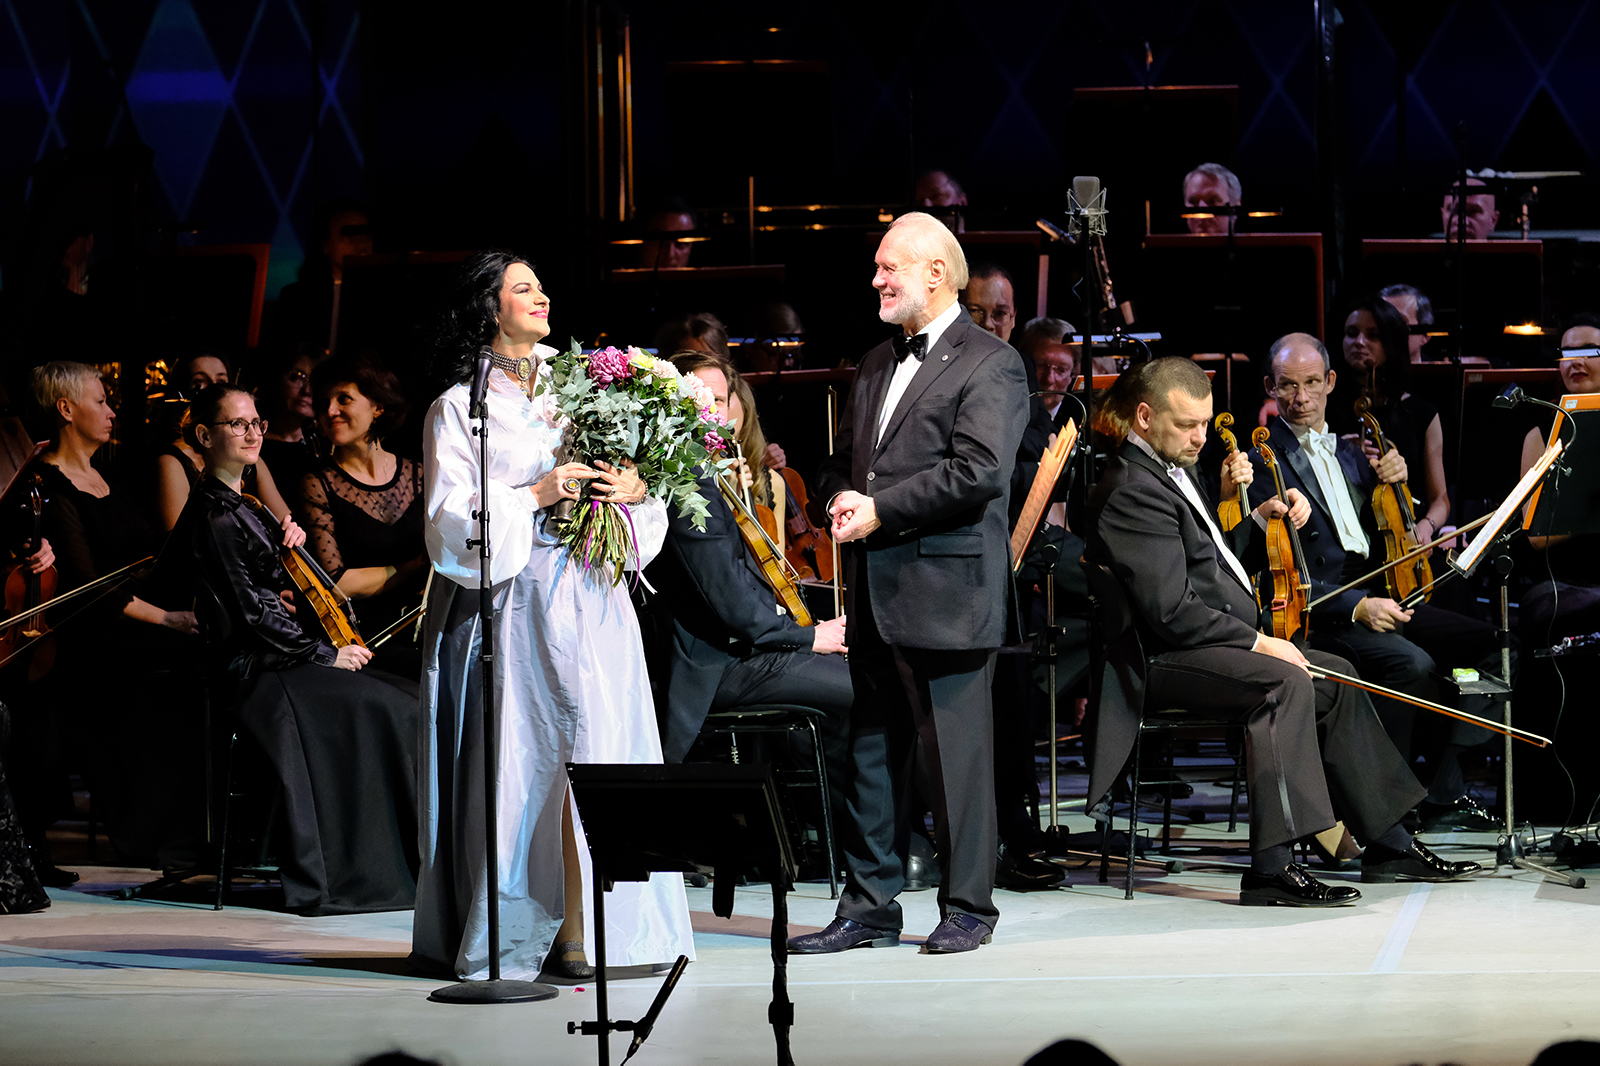 From Russia with Love award was presented to a international opera star Angela Gheorghiu